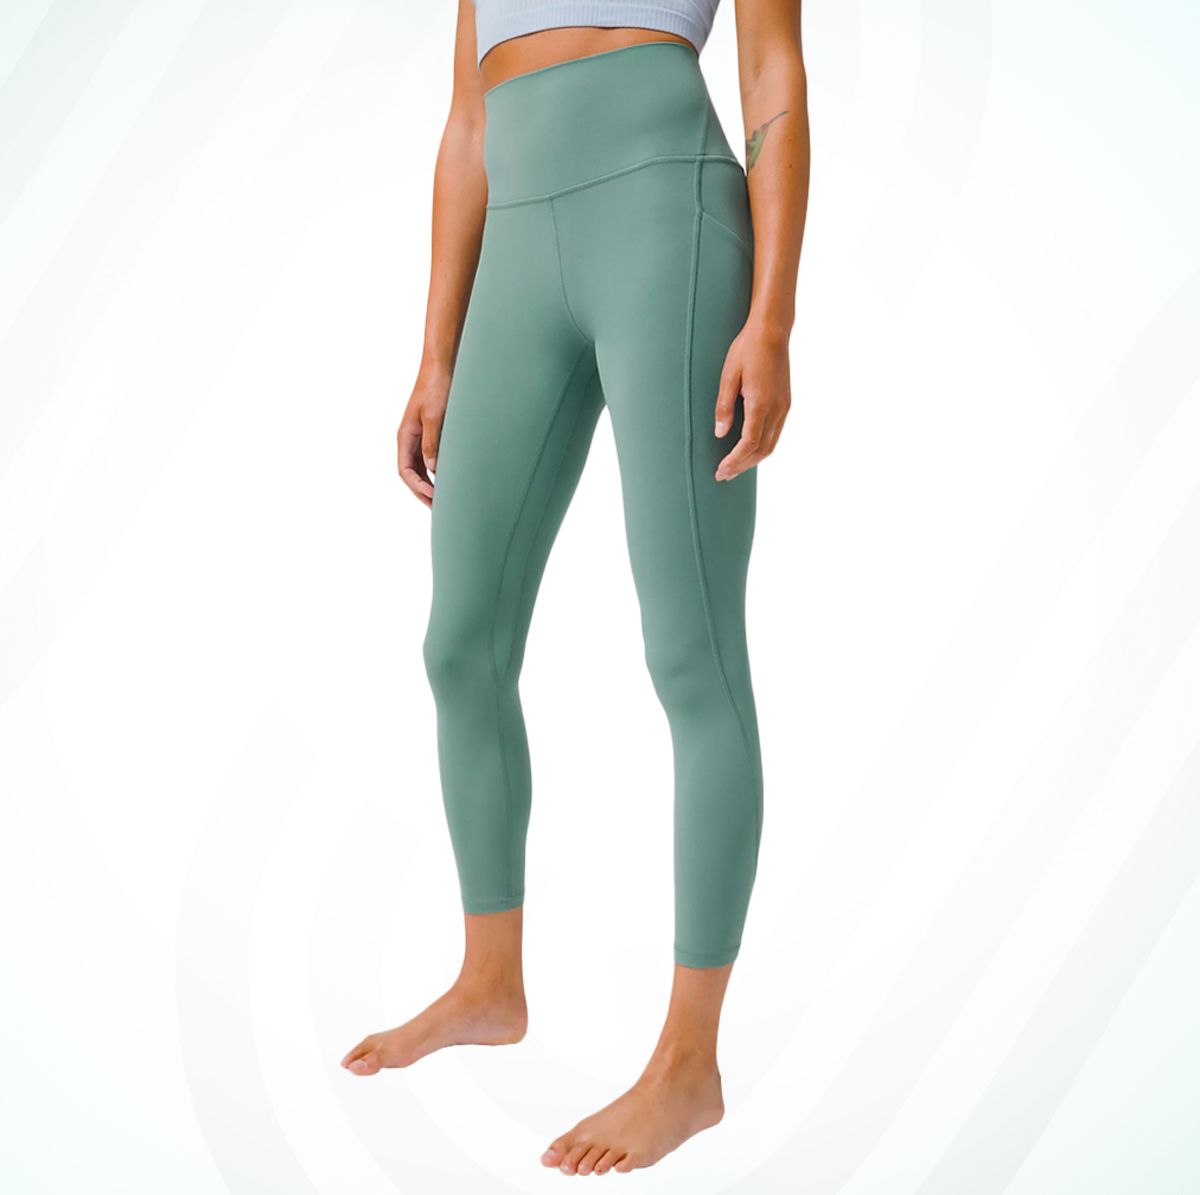 What is the difference between a regular yoga pant and a lulu